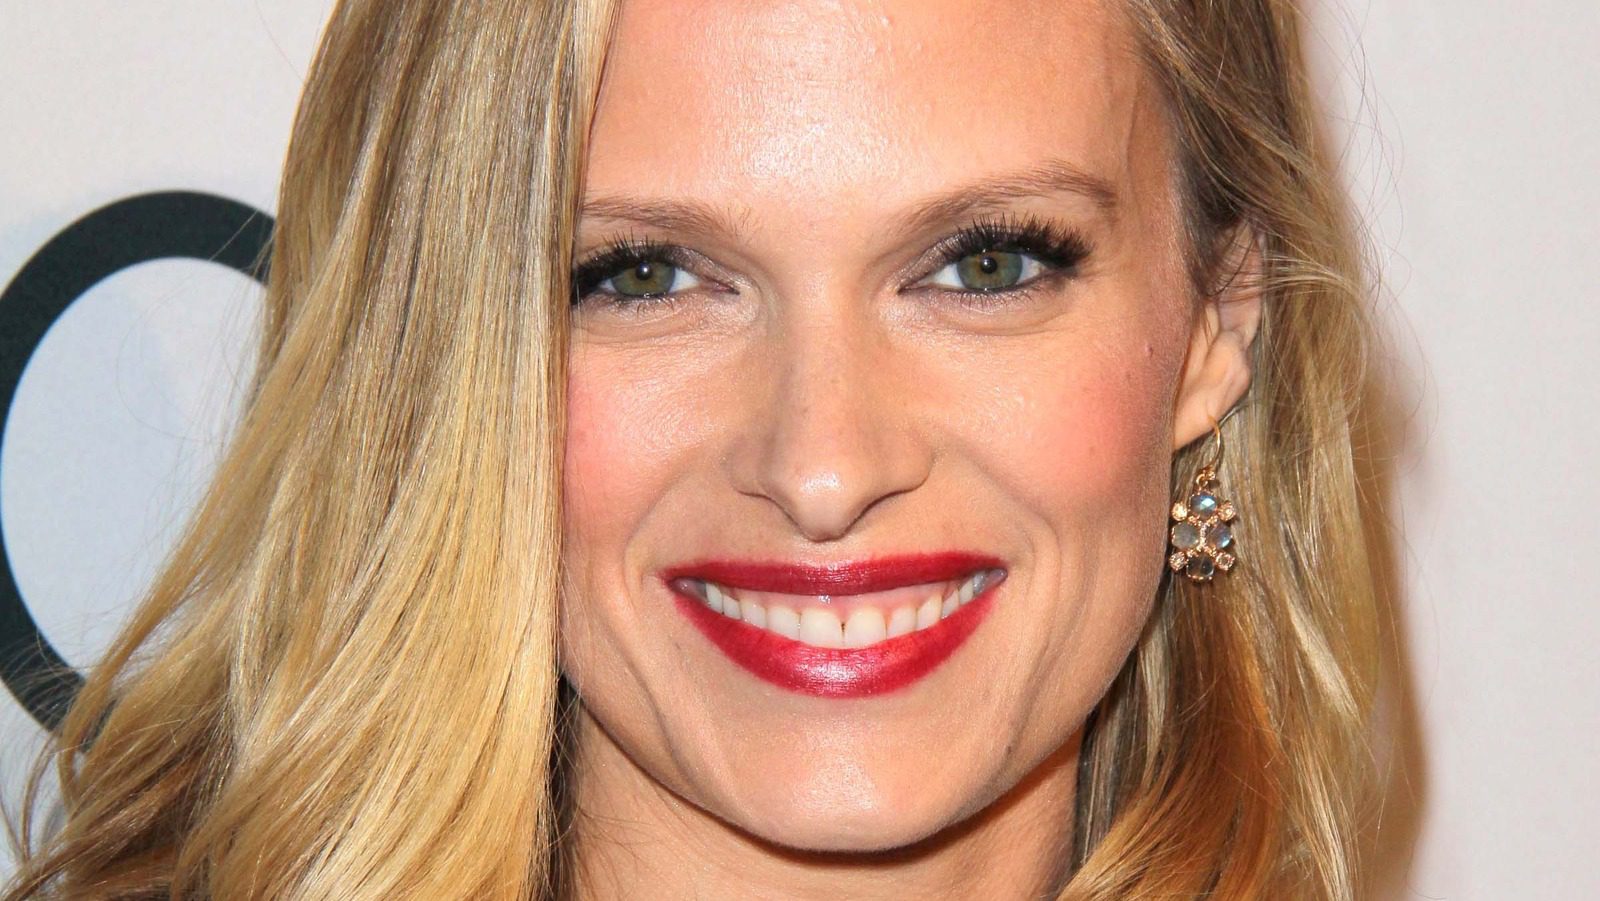 Hocus Pocus' Vinessa Shaw Almost Had A Much Harder Time Filming Thanks To The Original Costuming Plan